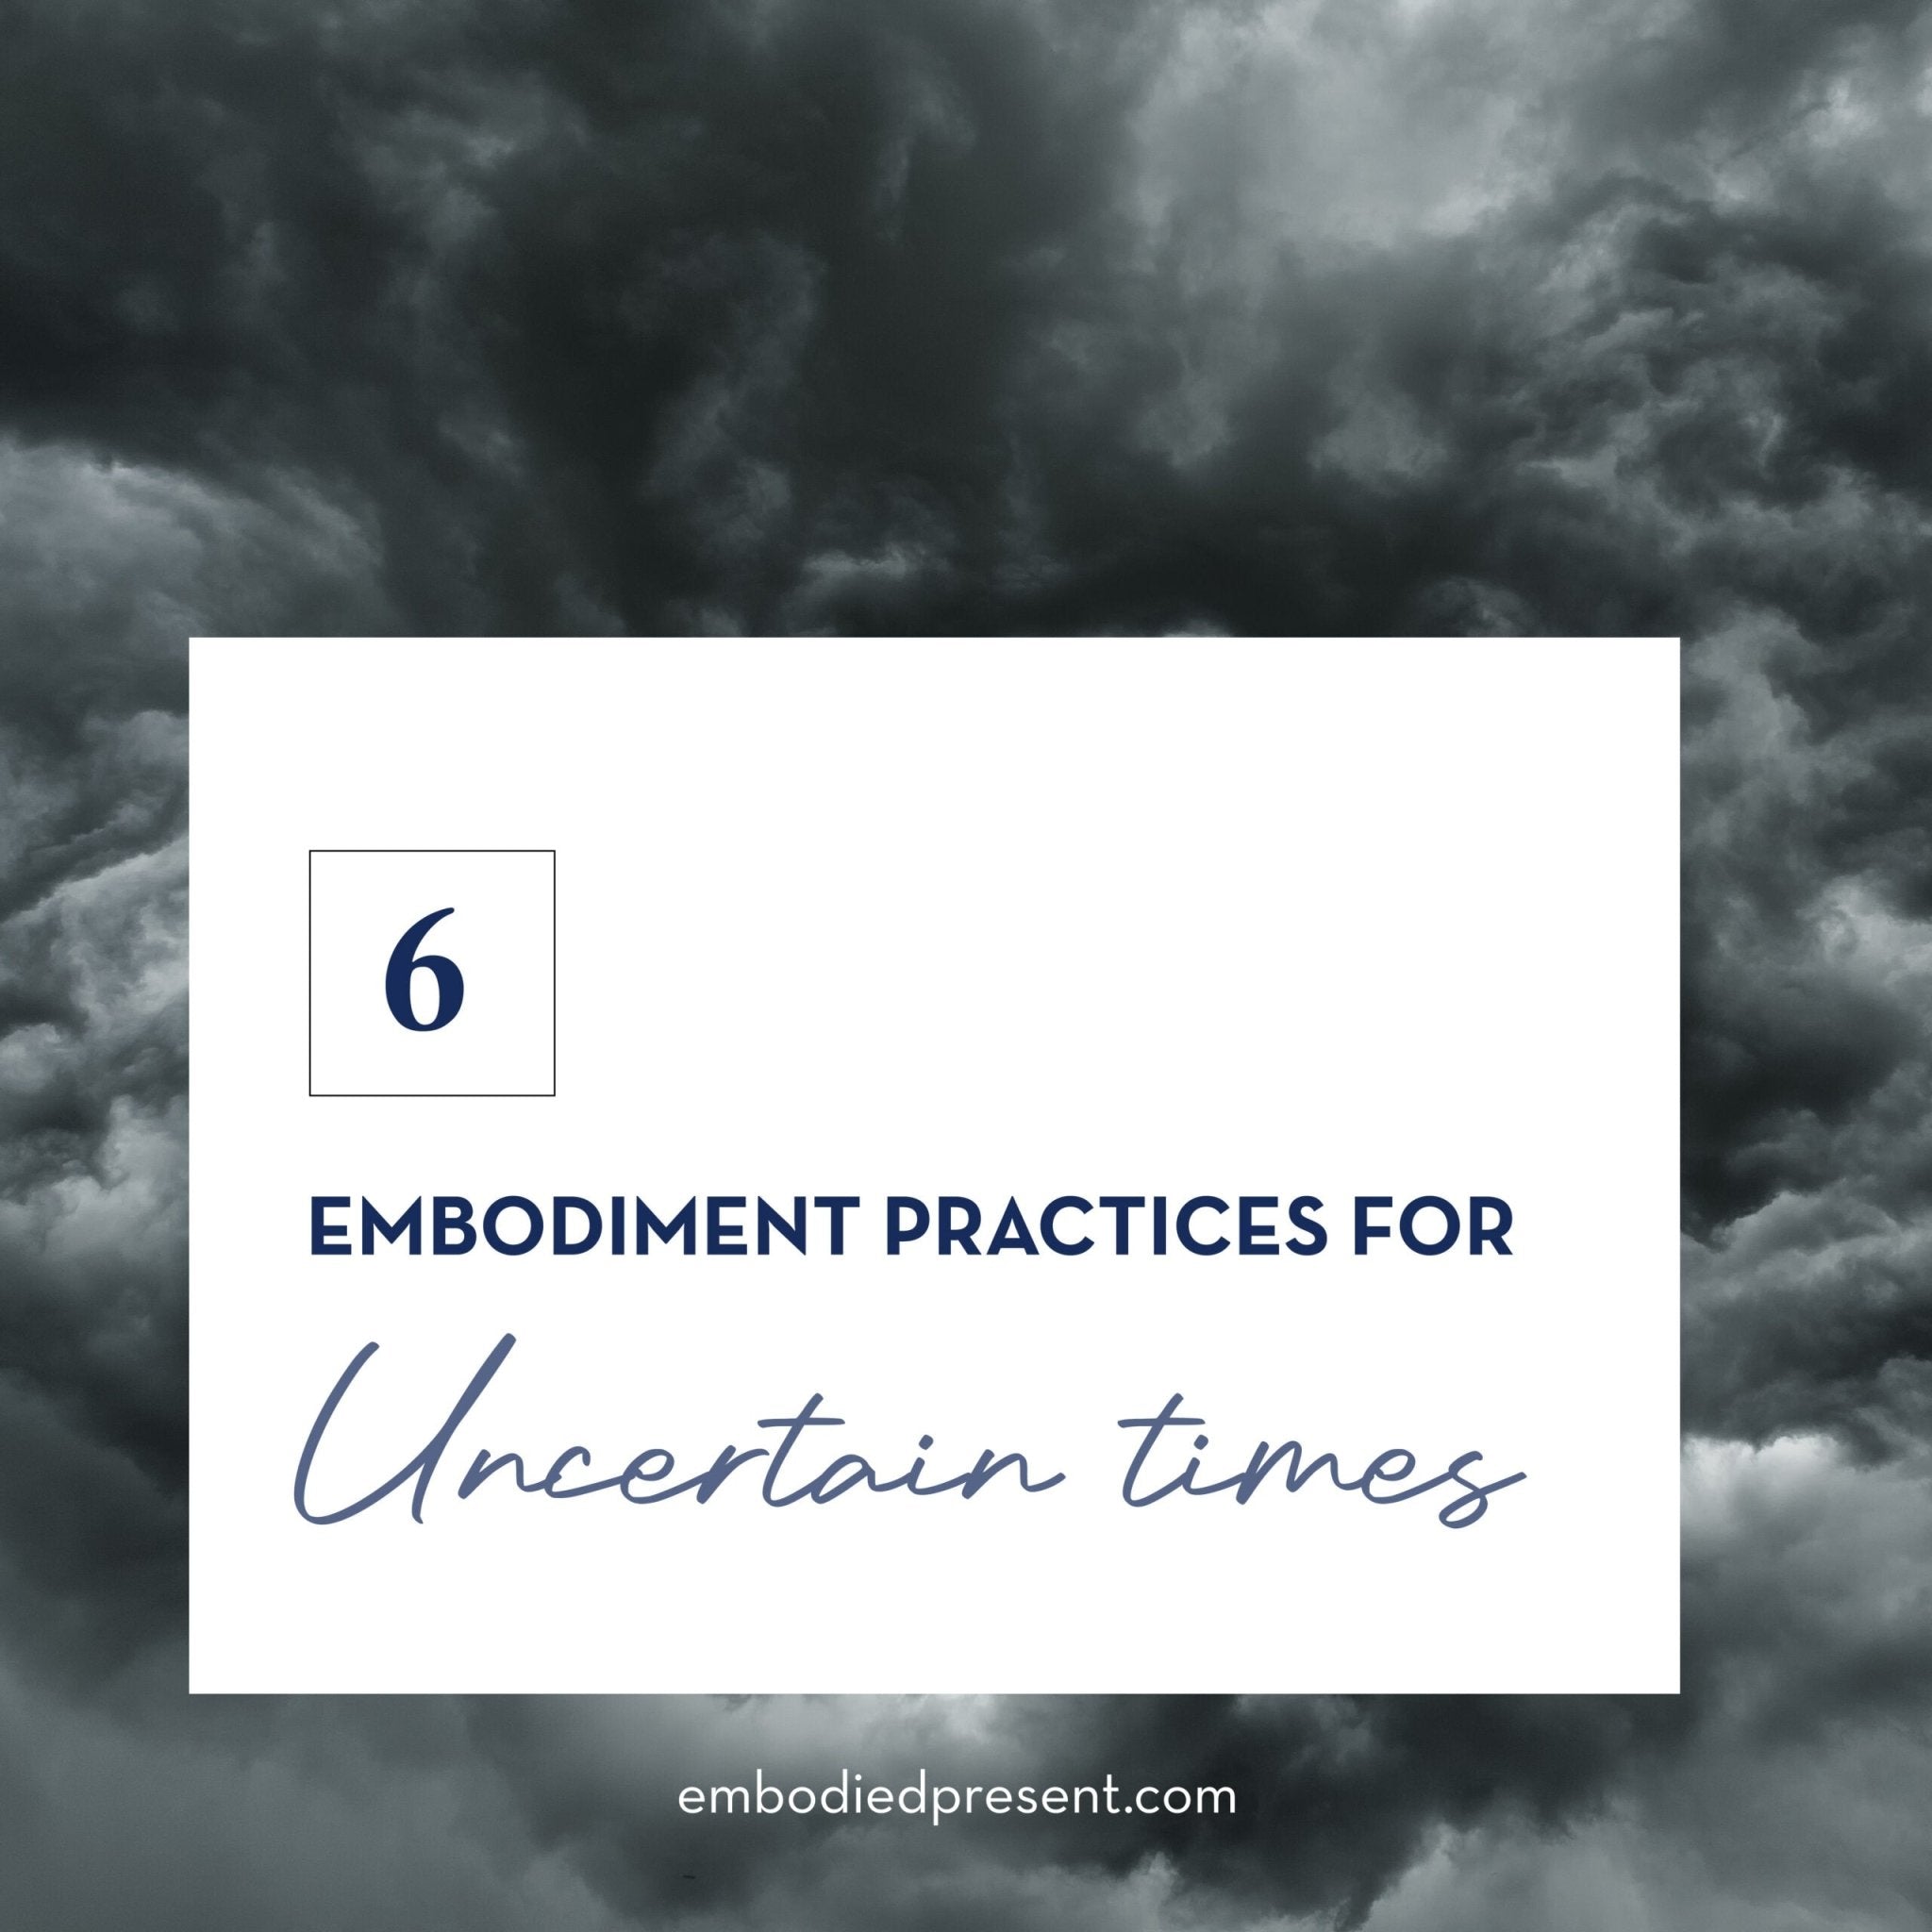 Embodiment Practices for Uncertain Times - The Embodied Present Process